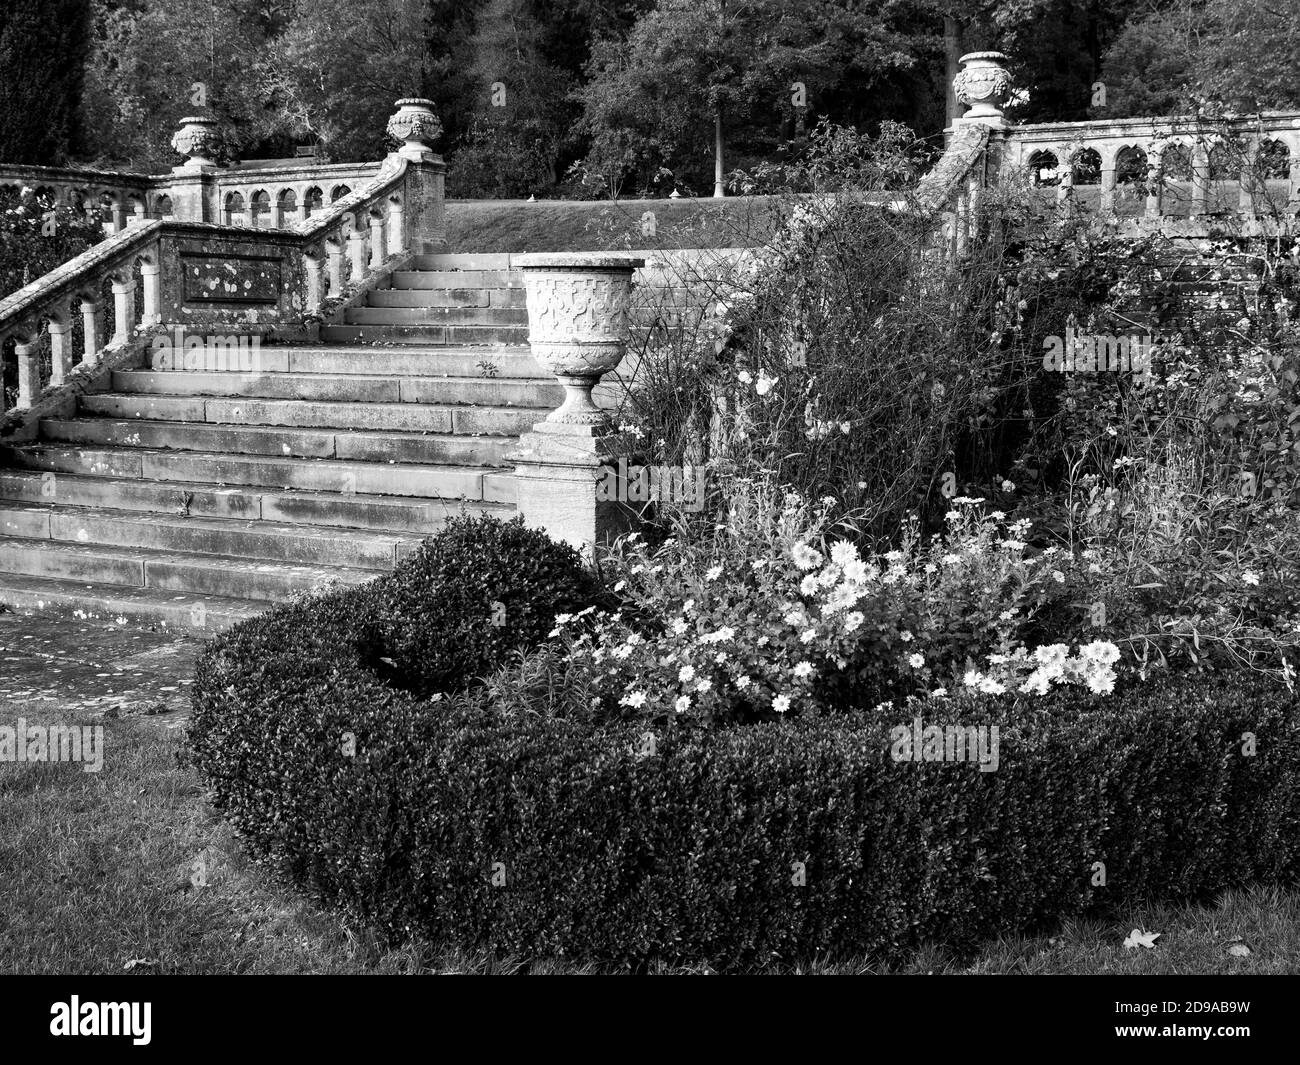 Steps, Black and White Country House Gardens, Englefield House, Englefield, Thale, Reading, Berkshire, Inghilterra, Regno Unito, GB. Foto Stock